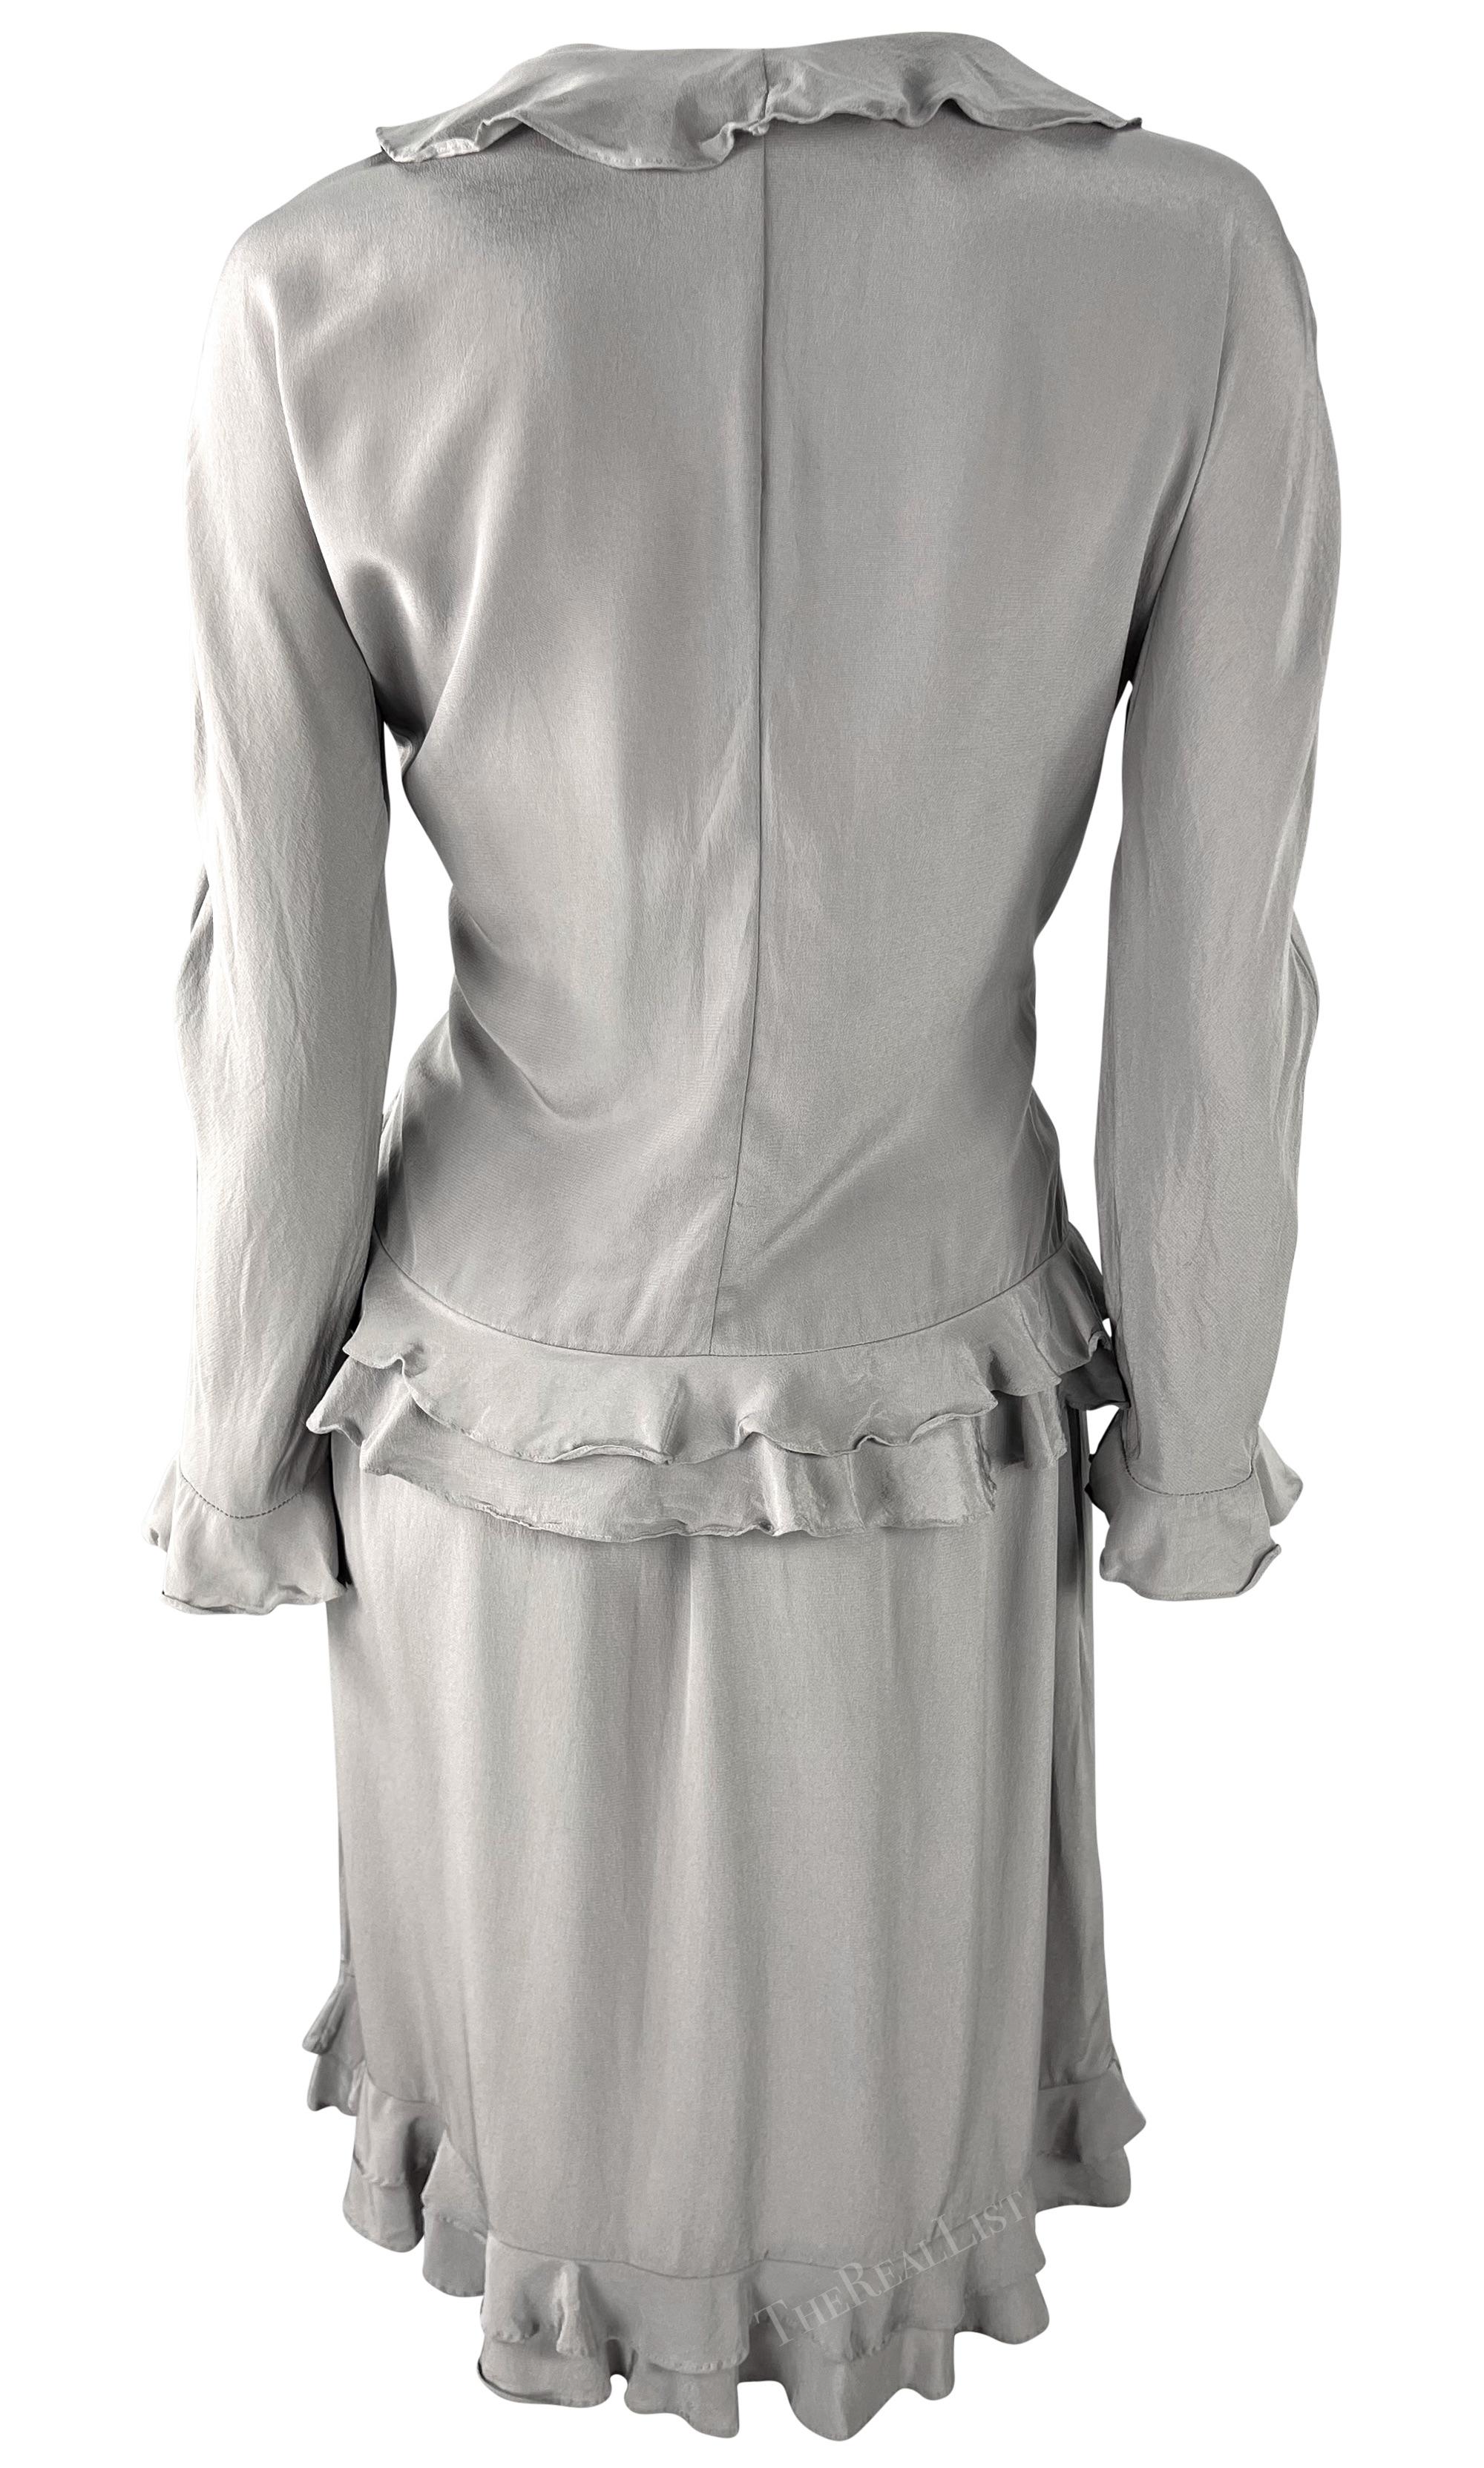 S/S 1999 Gucci by Tom Ford Ruffled Grey Silk Long Sleeve Top Skirt Set For Sale 1